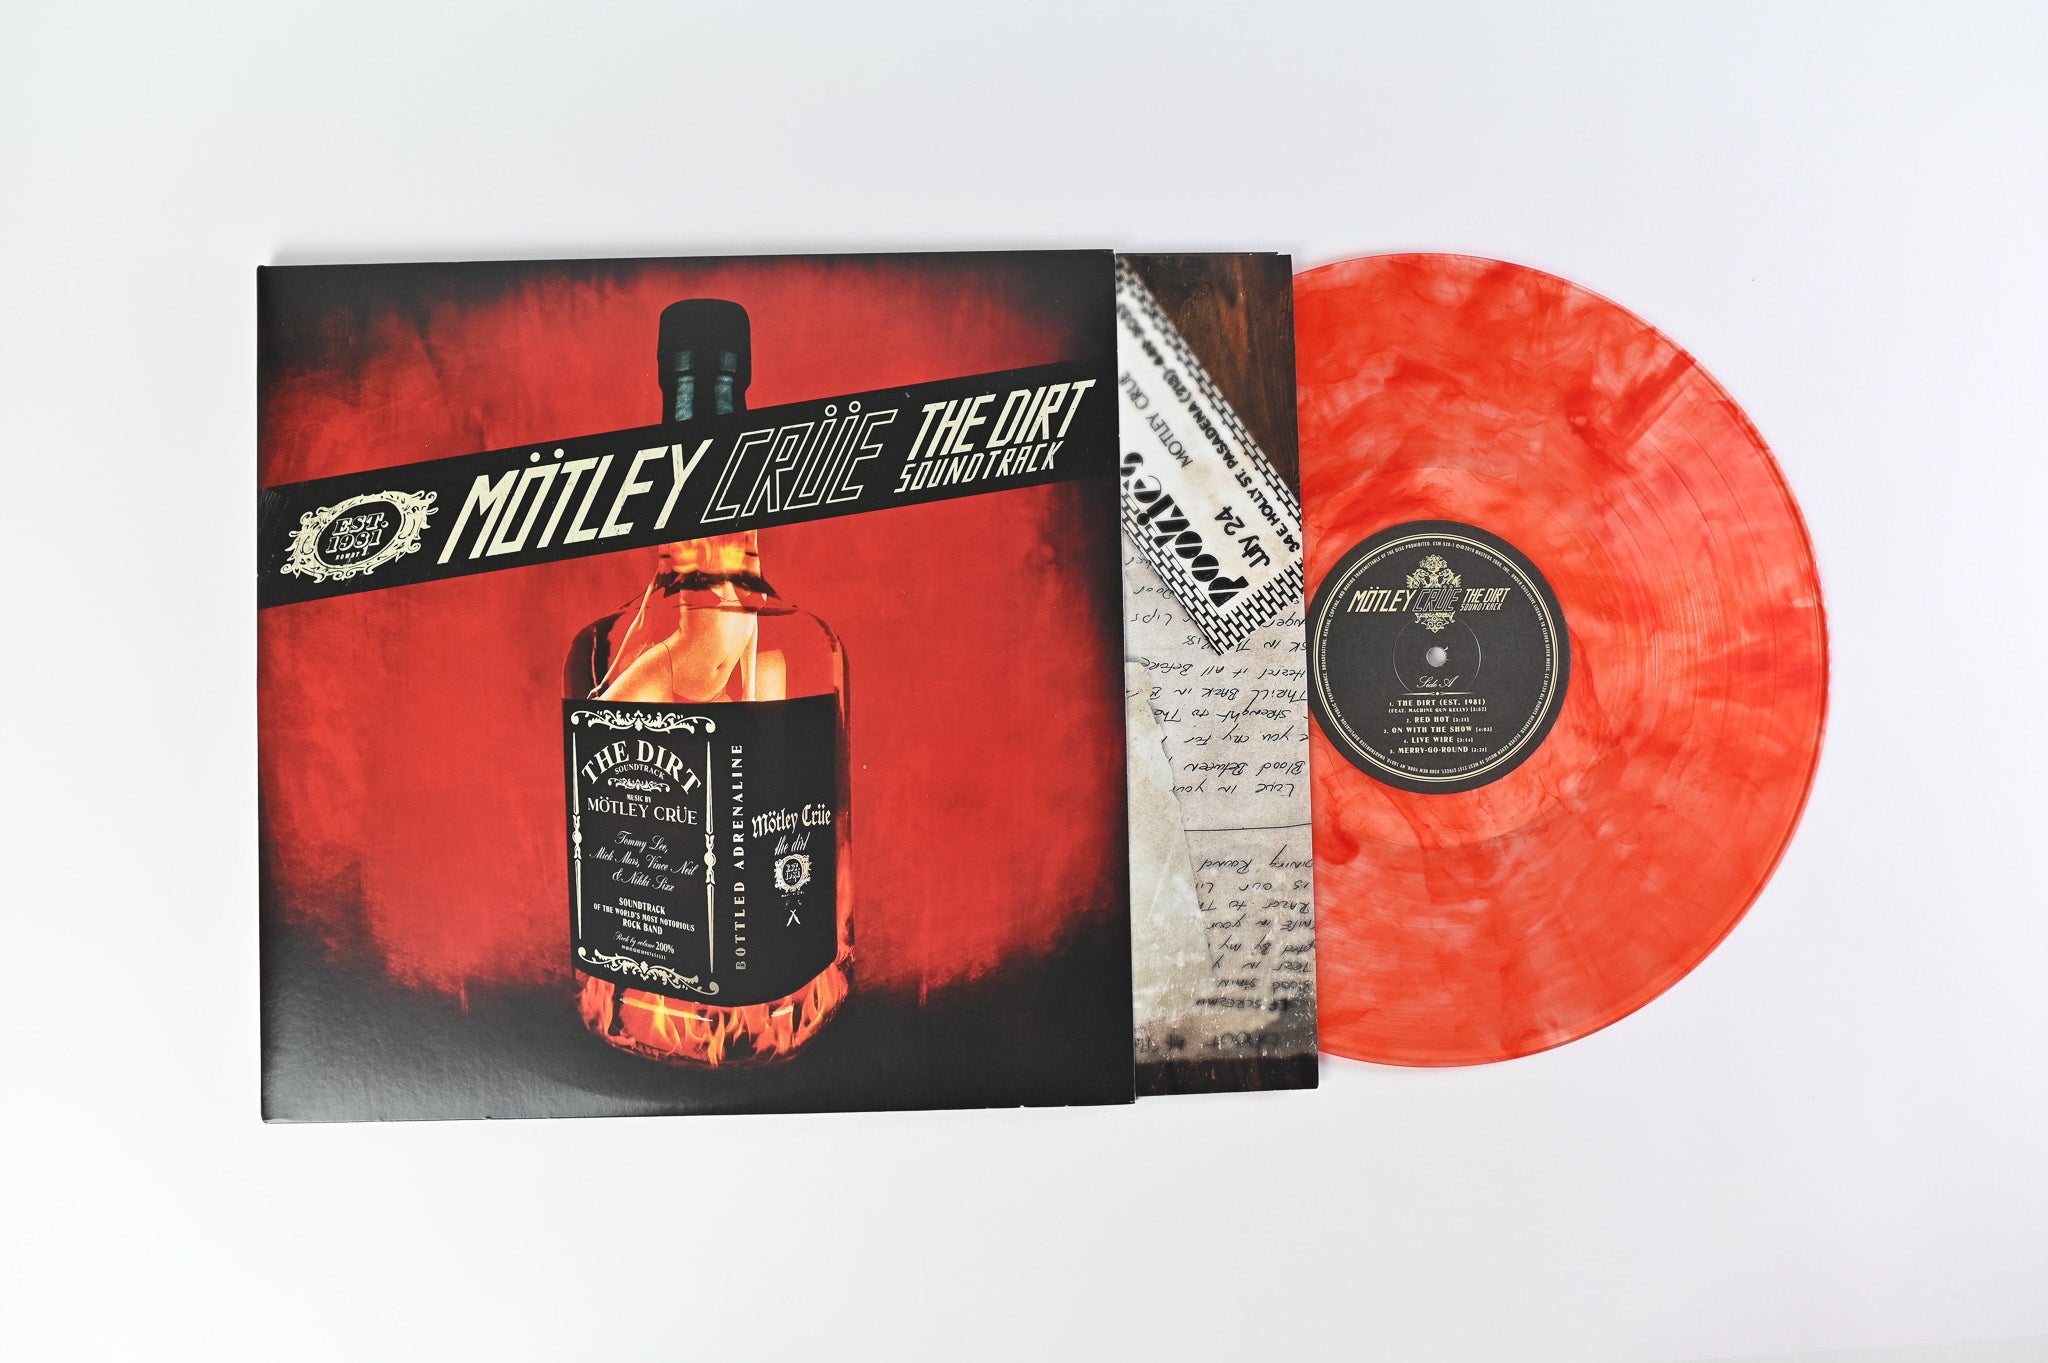 Mötley Crüe - The Dirt Soundtrack on Motley Records Clear w/Red Swirl Vinyl